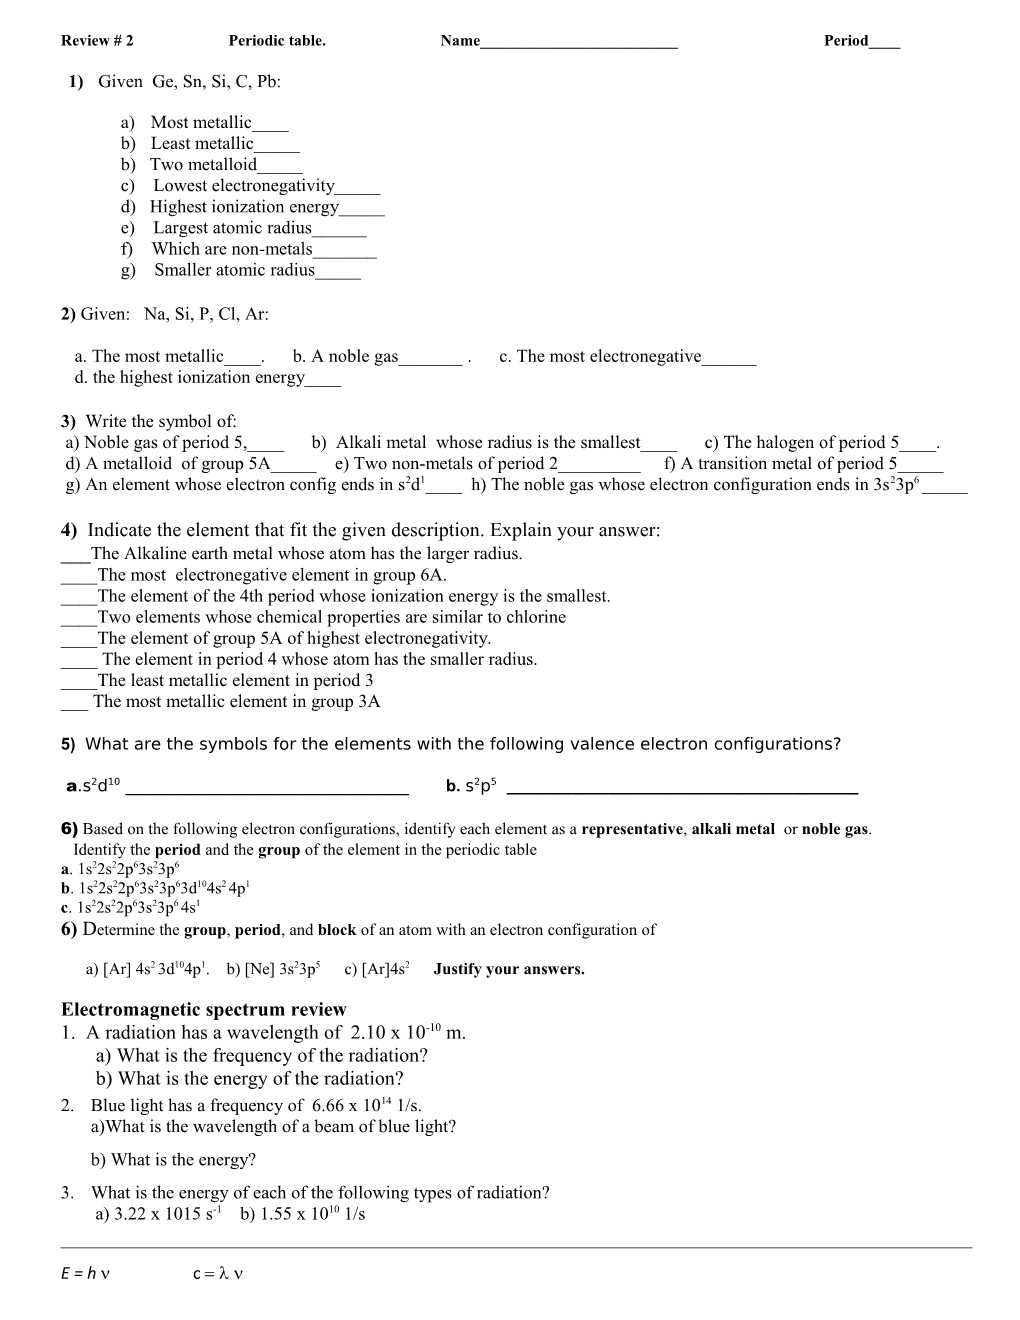 Electron Configuration/Periodic Trend Worksheet